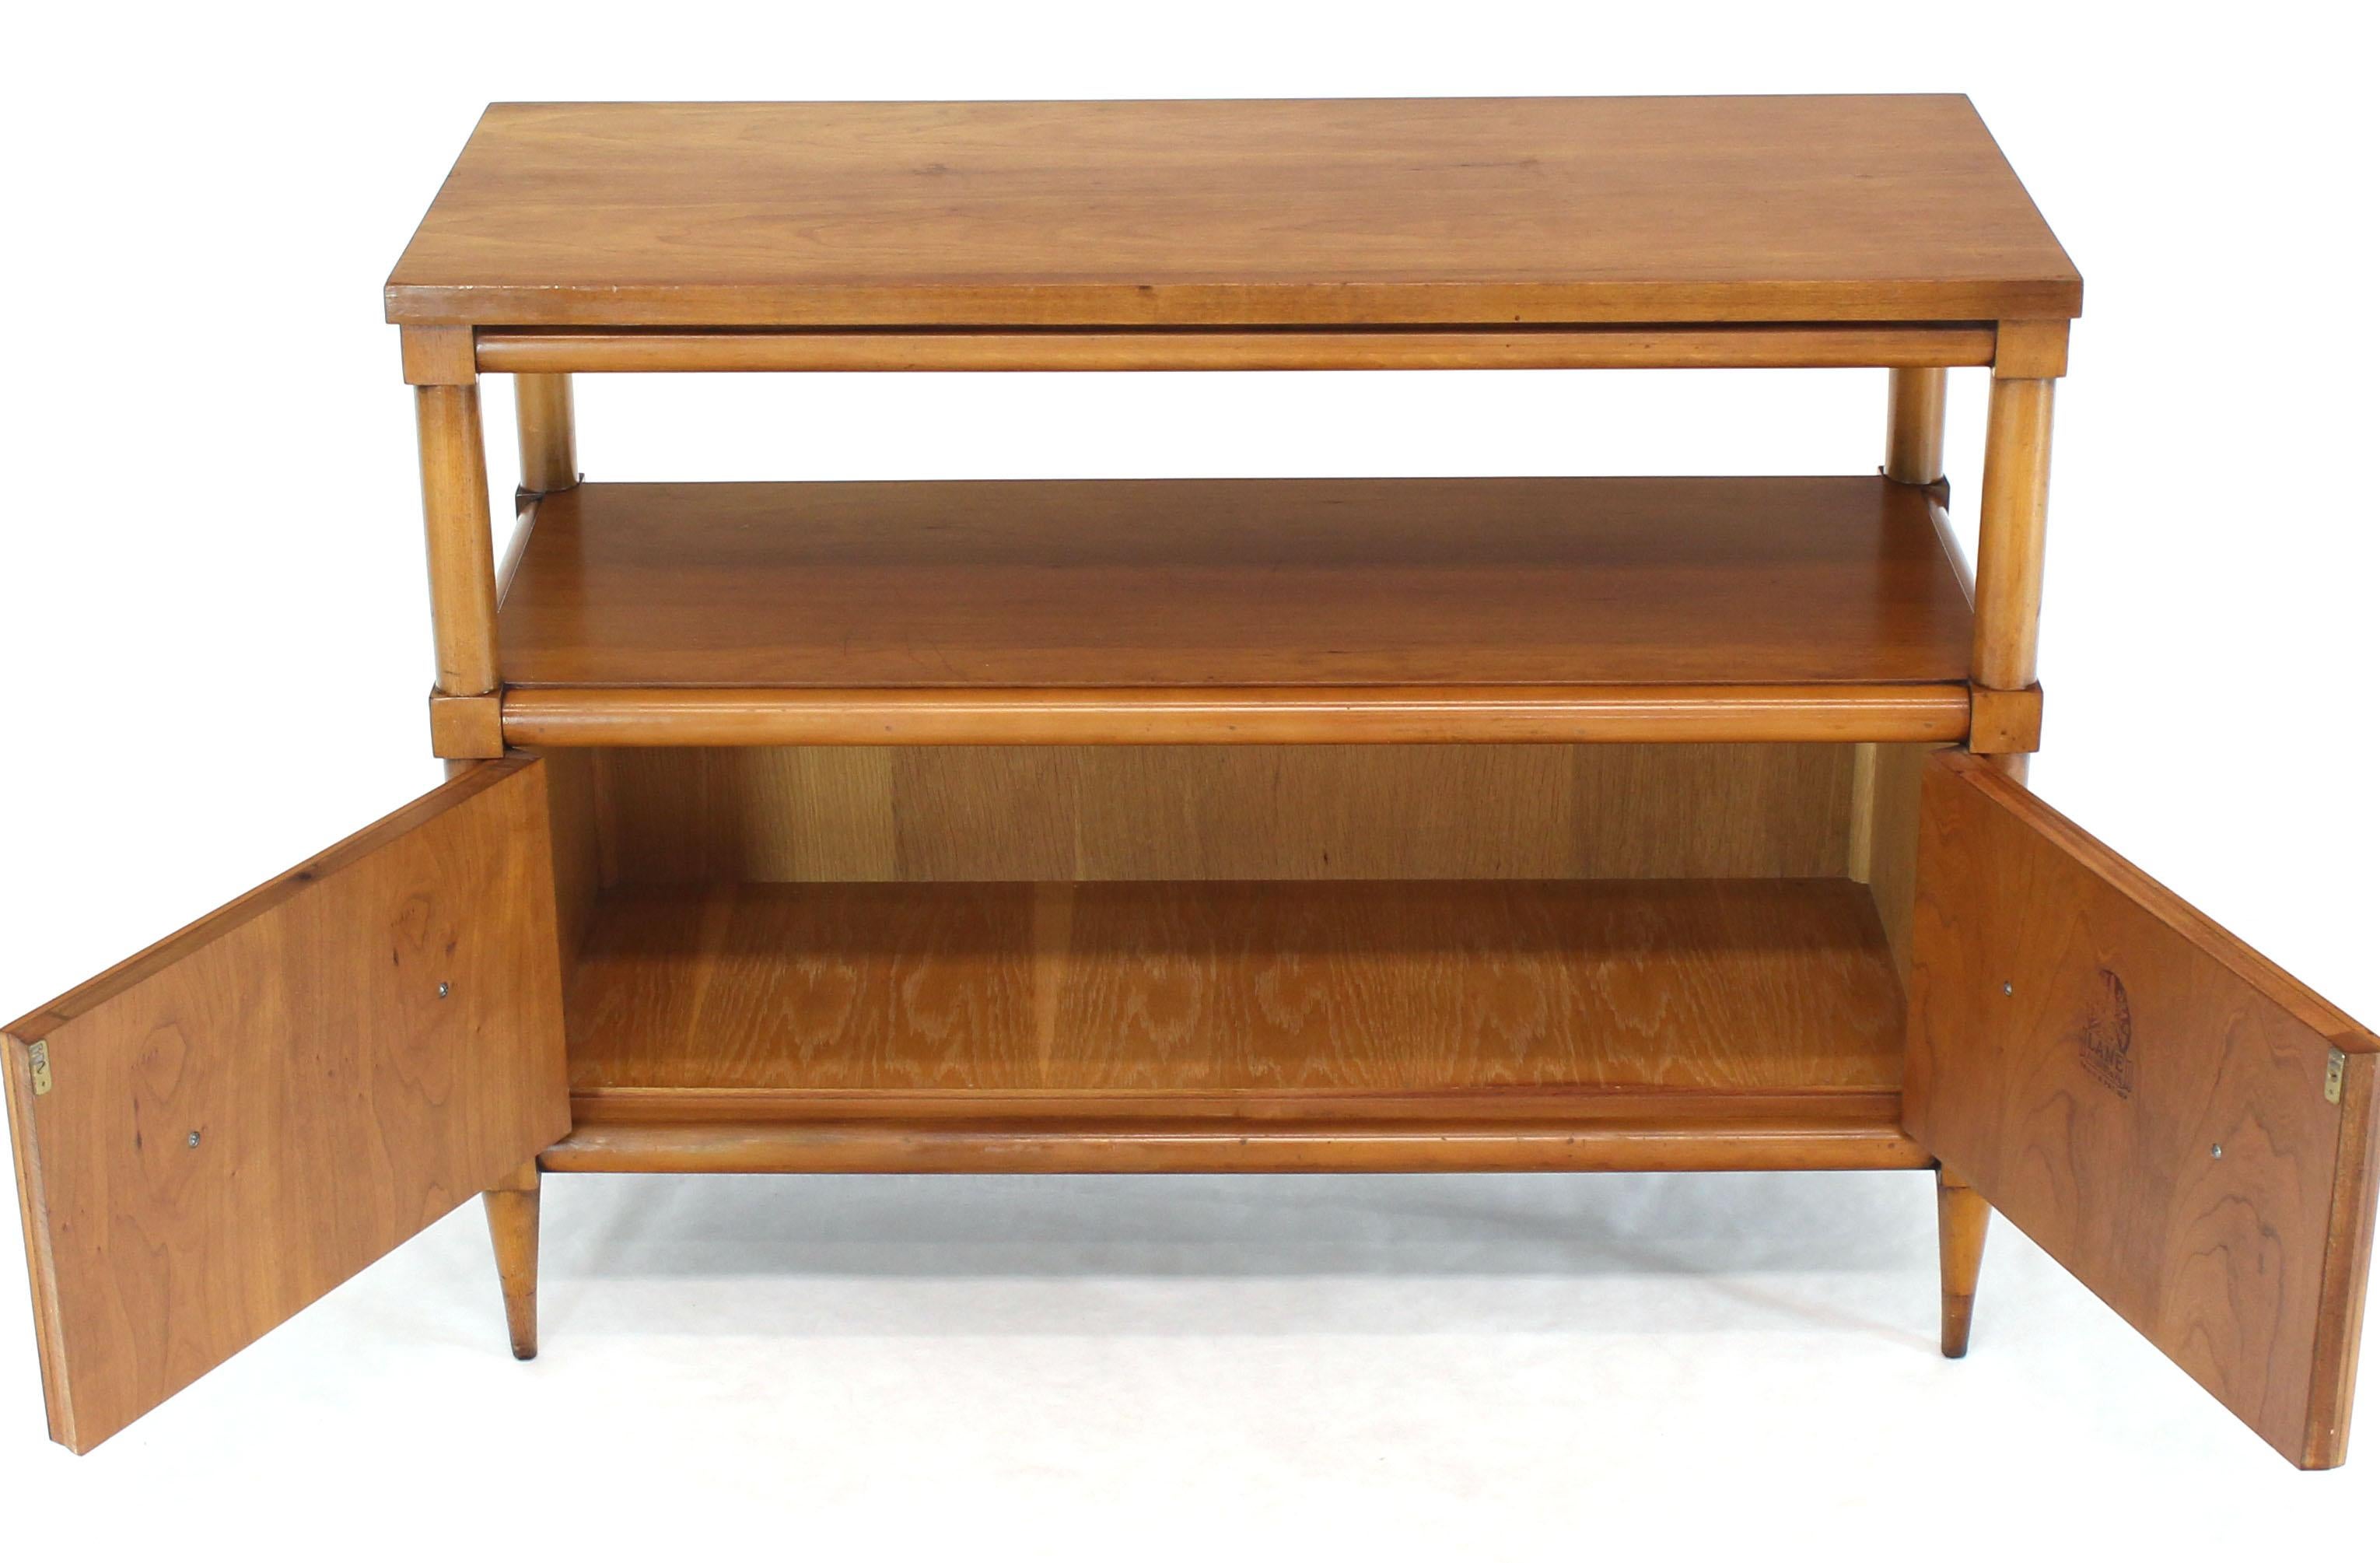 20th Century Small Cherry Two Tier Sideboard or Console Hall Table with Round Brass Pulls